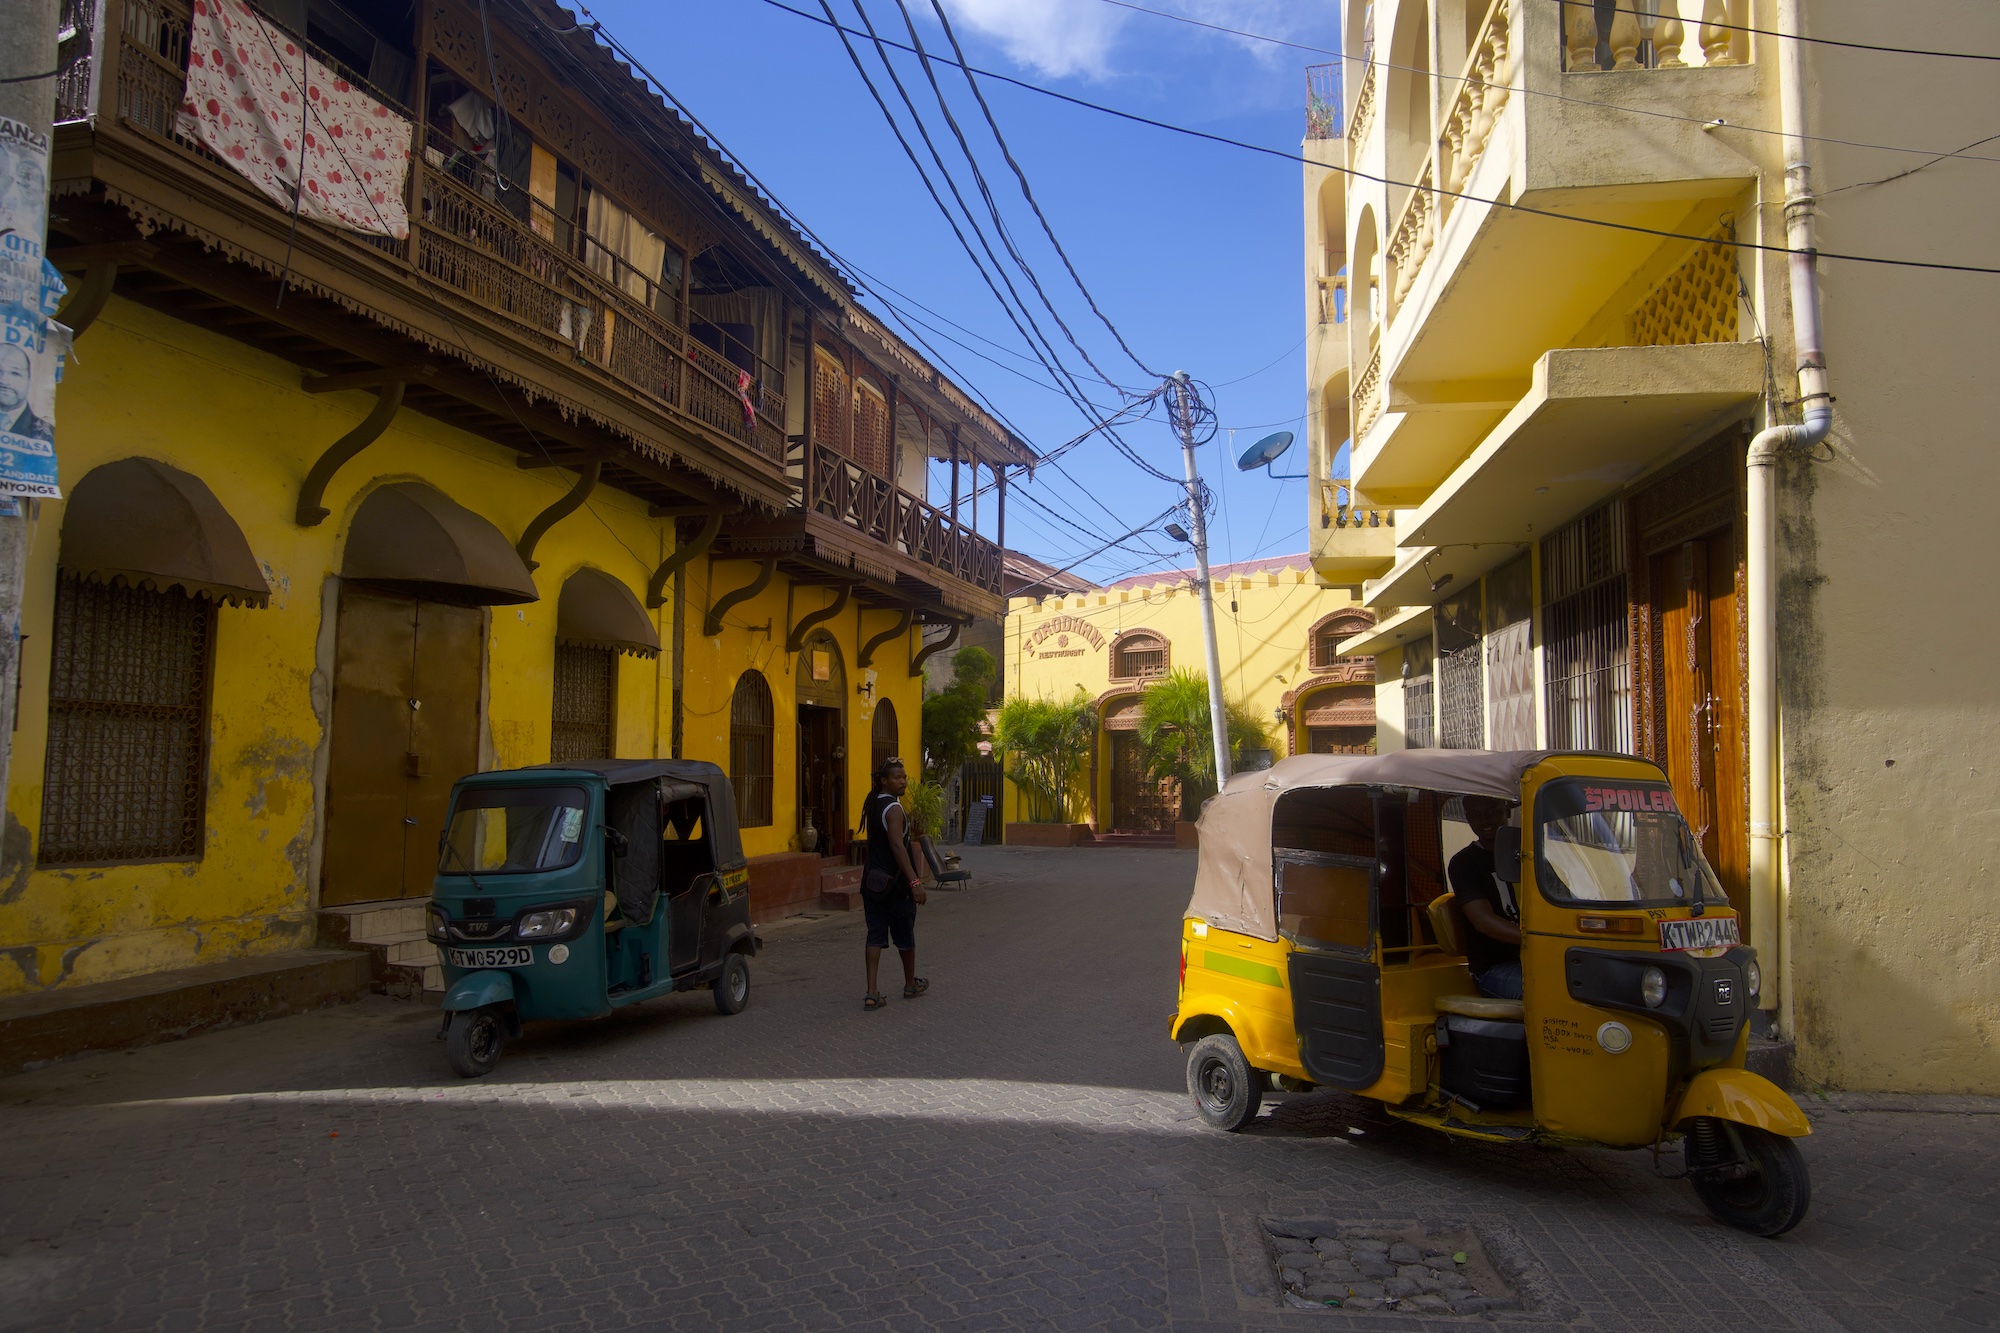 A view of Mombasa Old Town buildings and a yellow Tuk Tuk